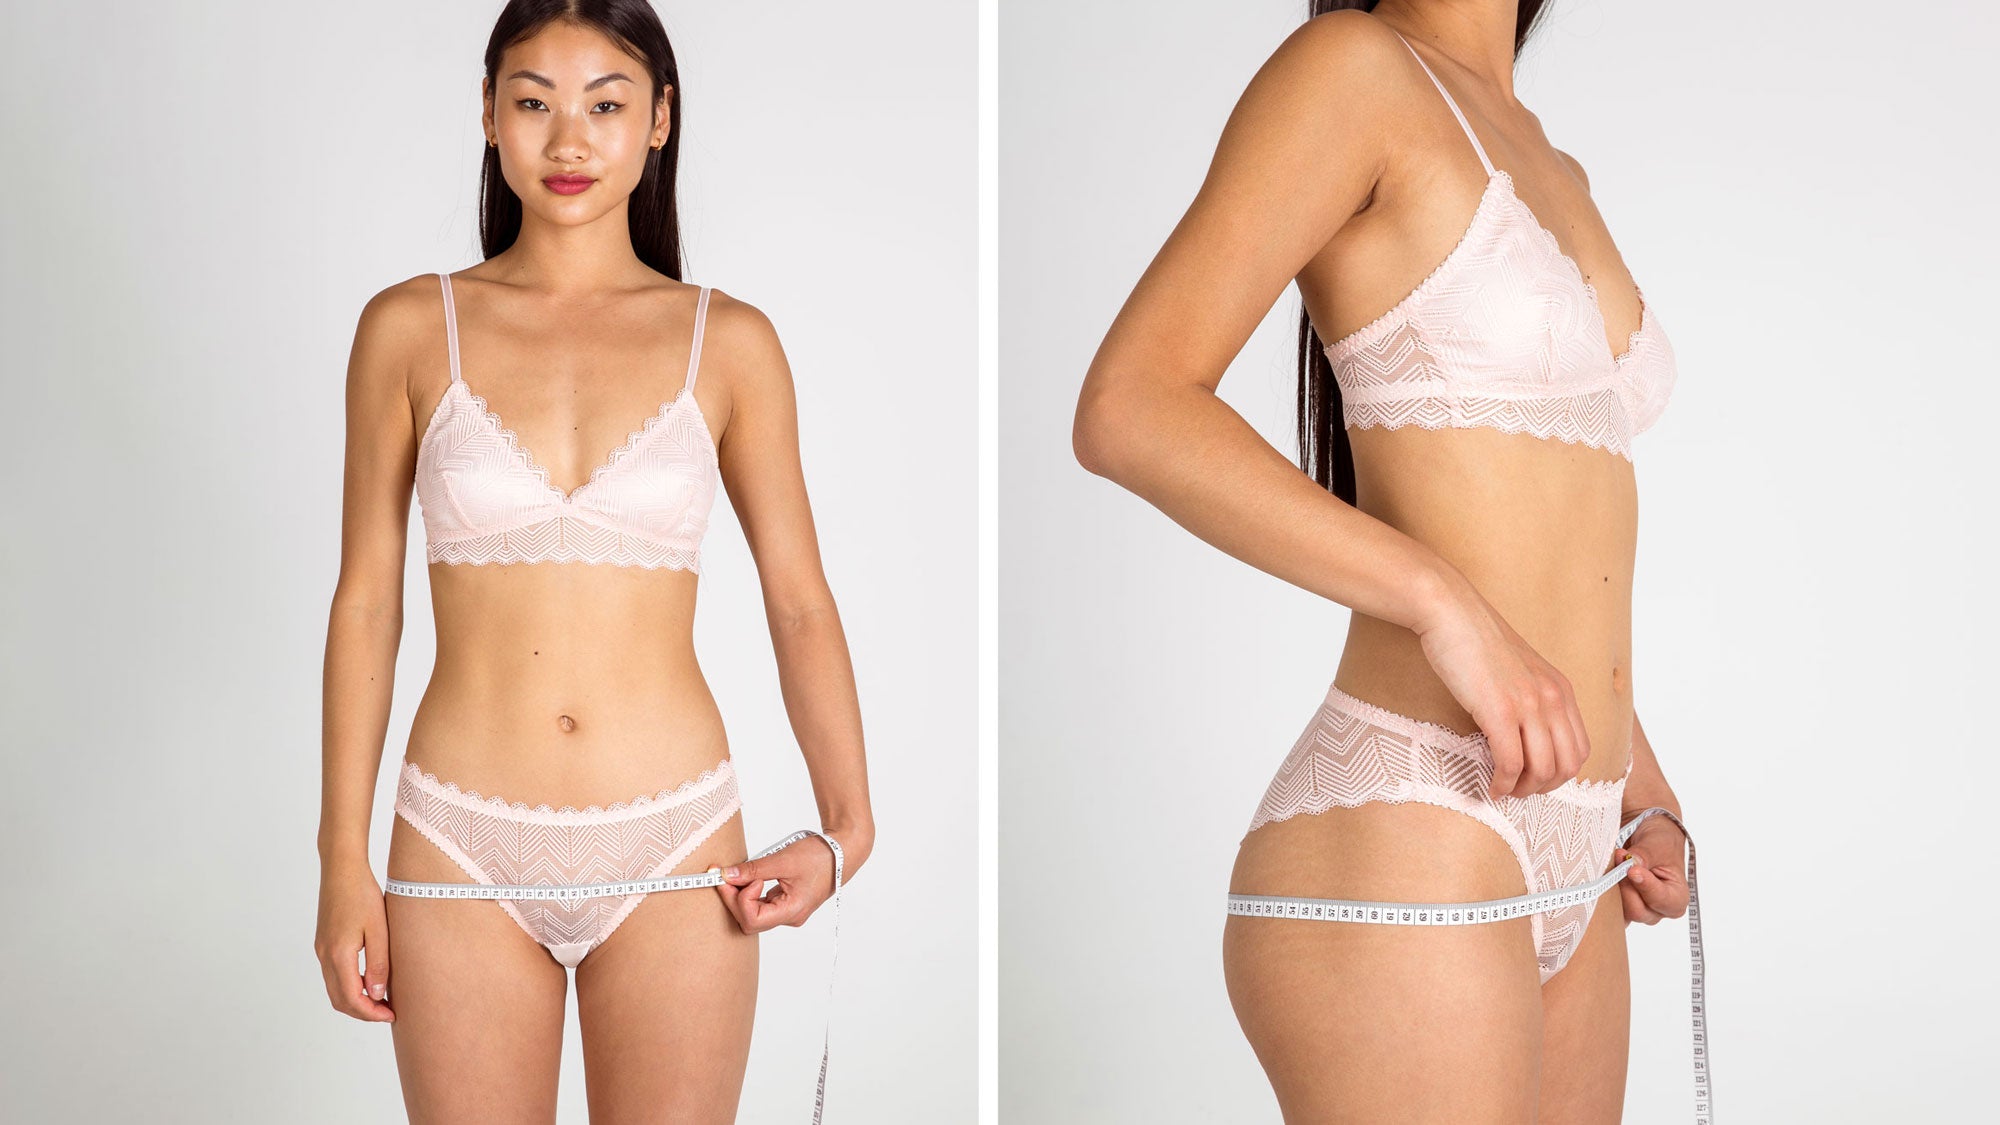 Measure yourself for lingerie